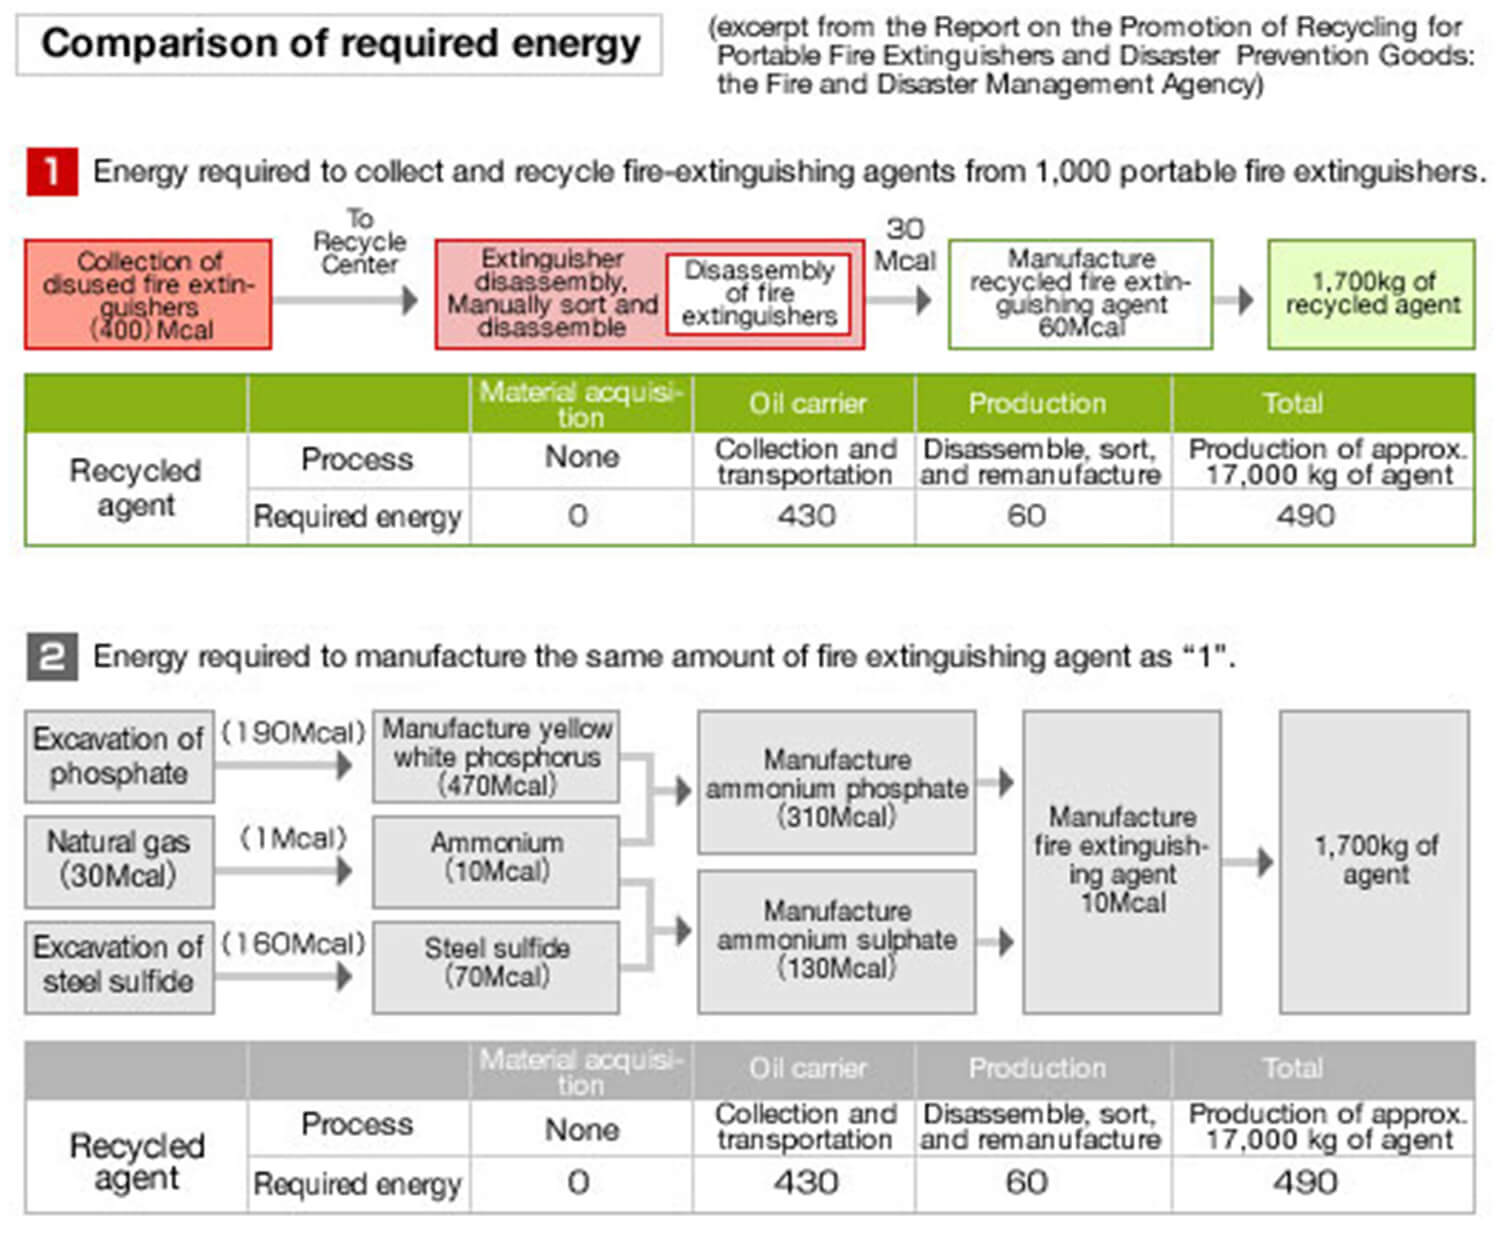 Comparison of required energy